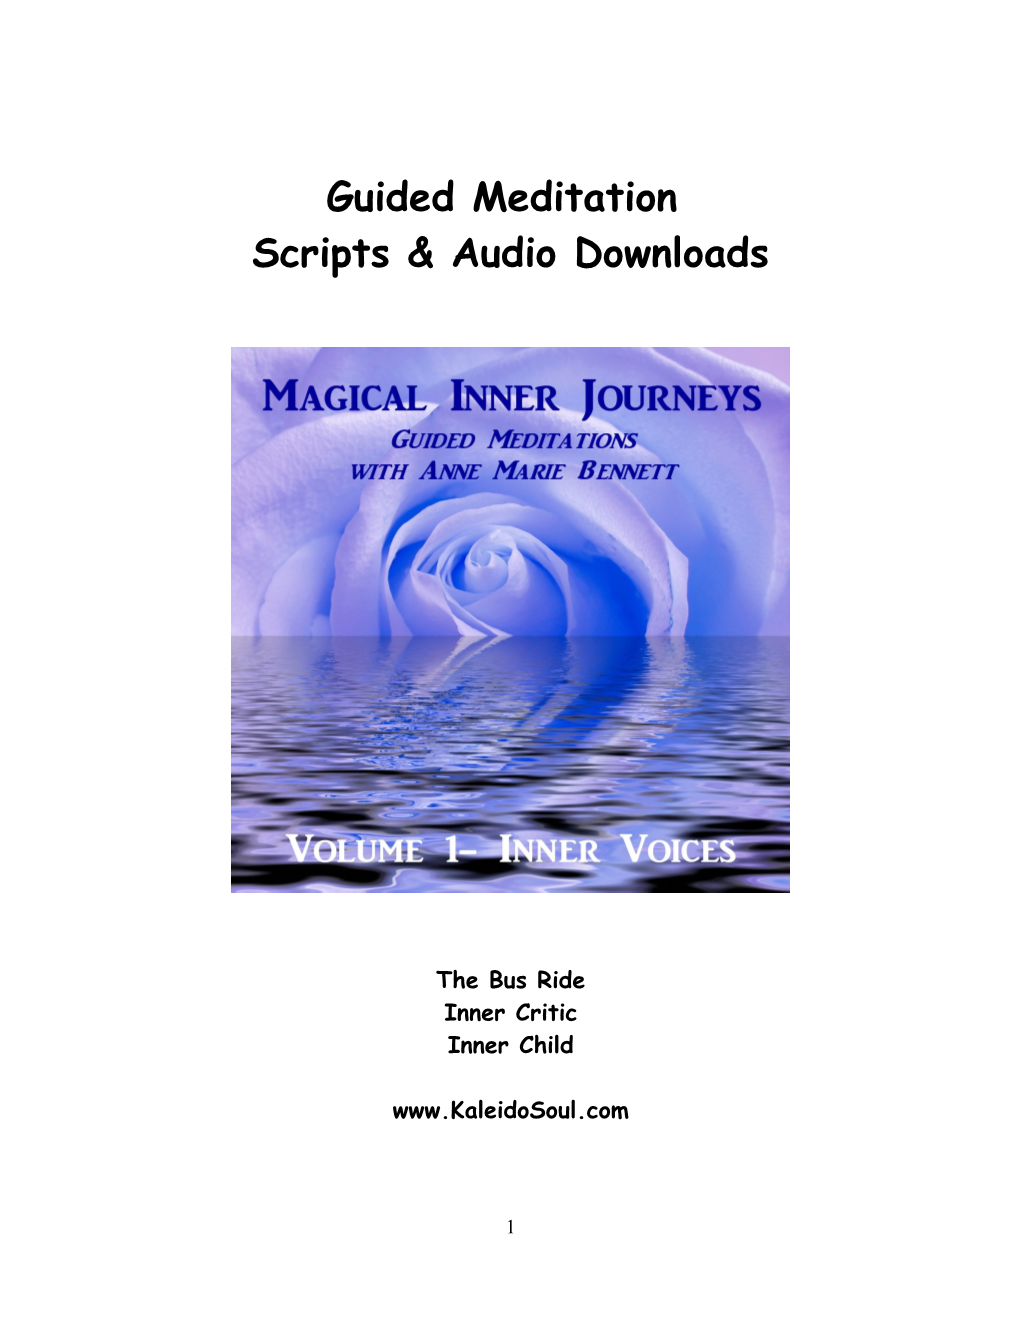 Guided Meditation Scripts & Audio Downloads